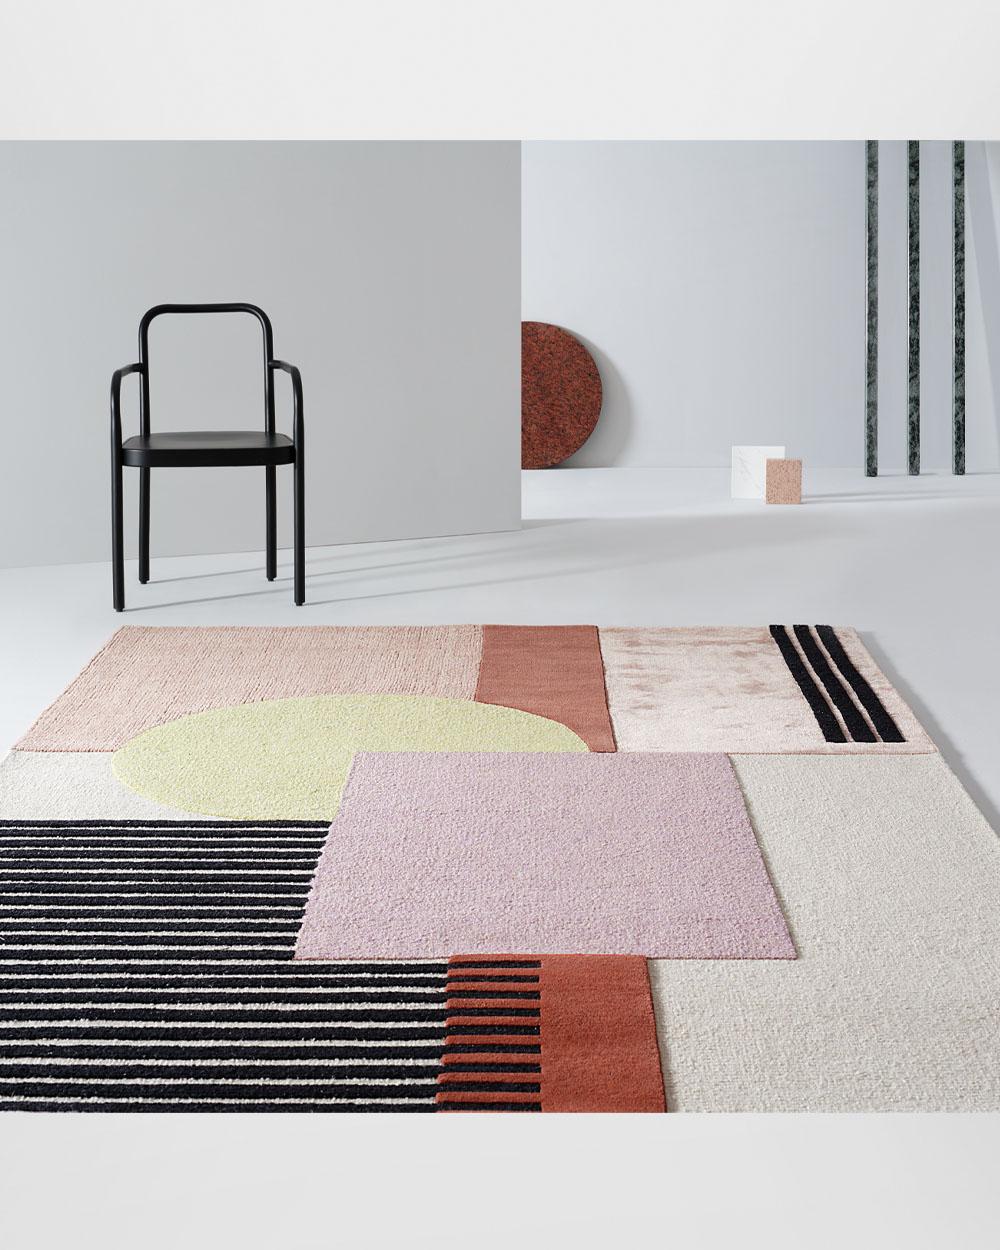 The GTV catalogue is enriched with new home accessories with the AROUND COLORS RUGS COLLECTION carpets designed by Paola Pastorini, a stylist who has been working with the company for several years, handcrafted by CC Tapis. Originating from a